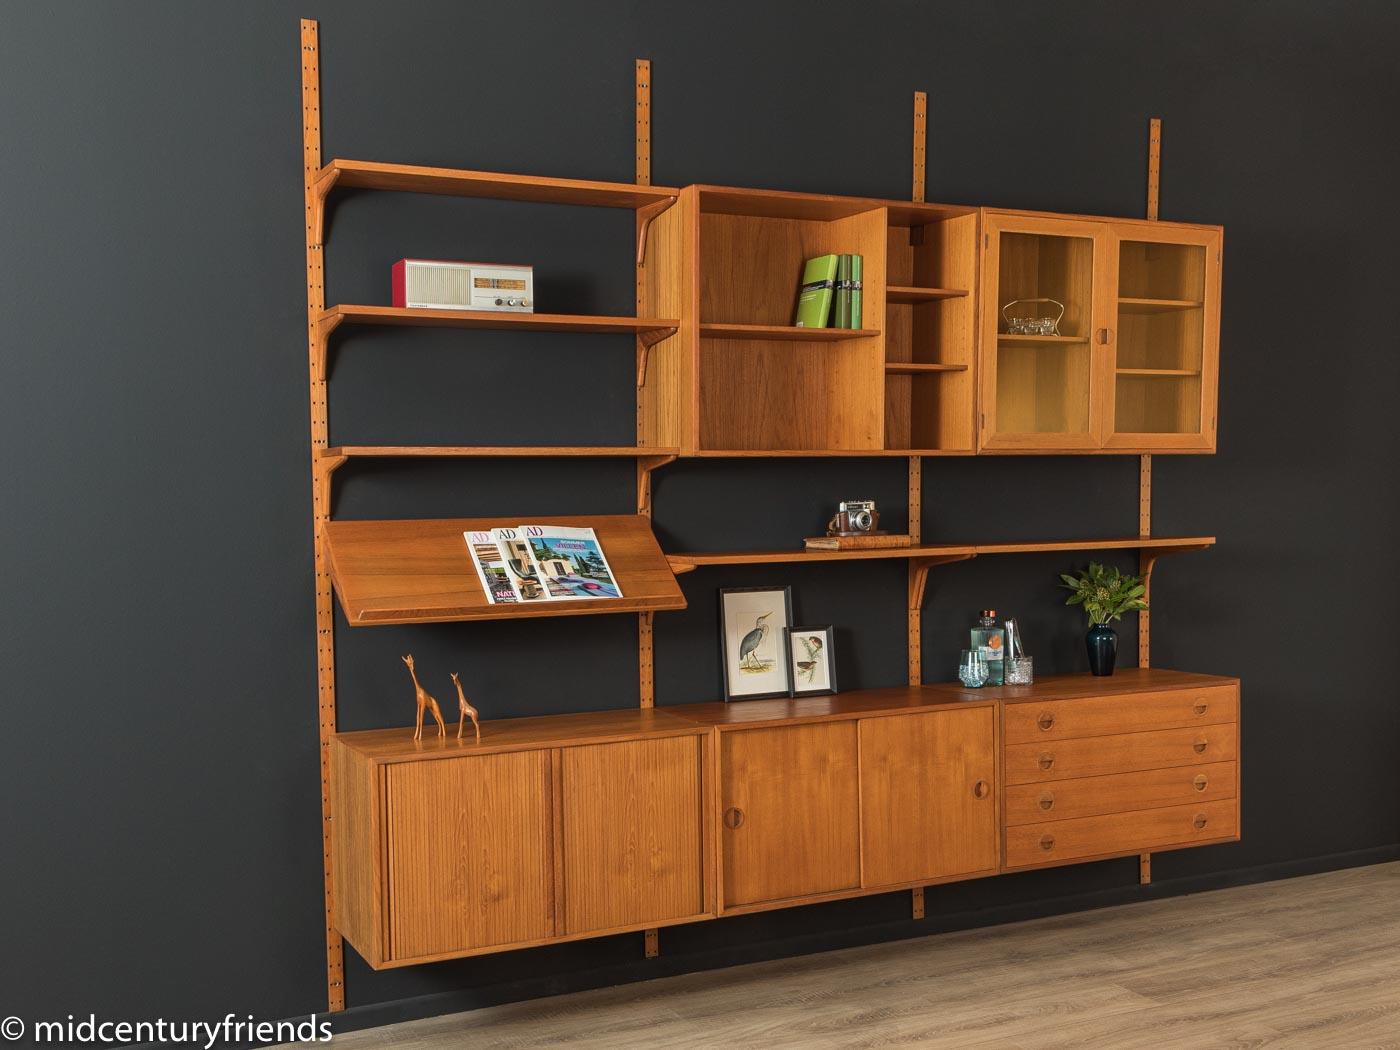 Danish 60s Wall Shelving System by HG Furniture, with Showcase, Magazine Rack, Drawers